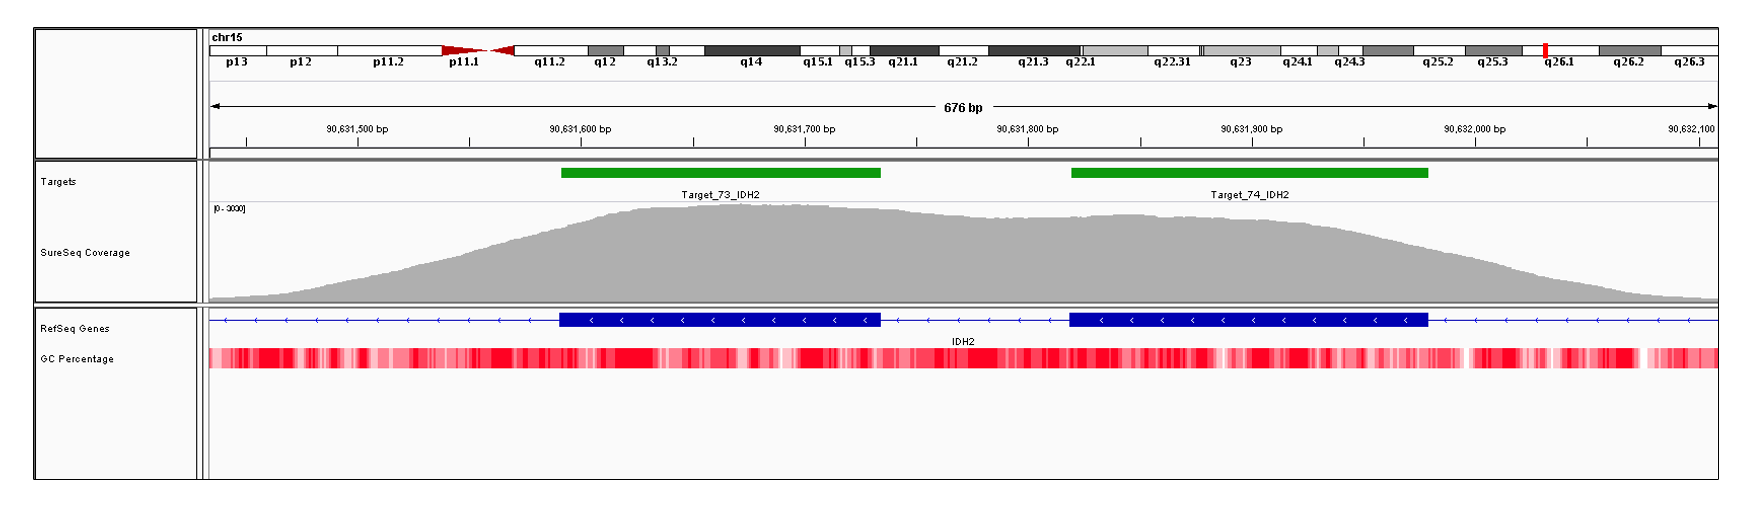 IDH2 Exons 4 (hg19 chr15:90631819-90631979) and 5 (hg19 chr15:90631591-90631734). Depth of coverage per base (grey). Targeted region (green). Gene coding region as defined by RefSeq (blue). GC percentage (red). Image